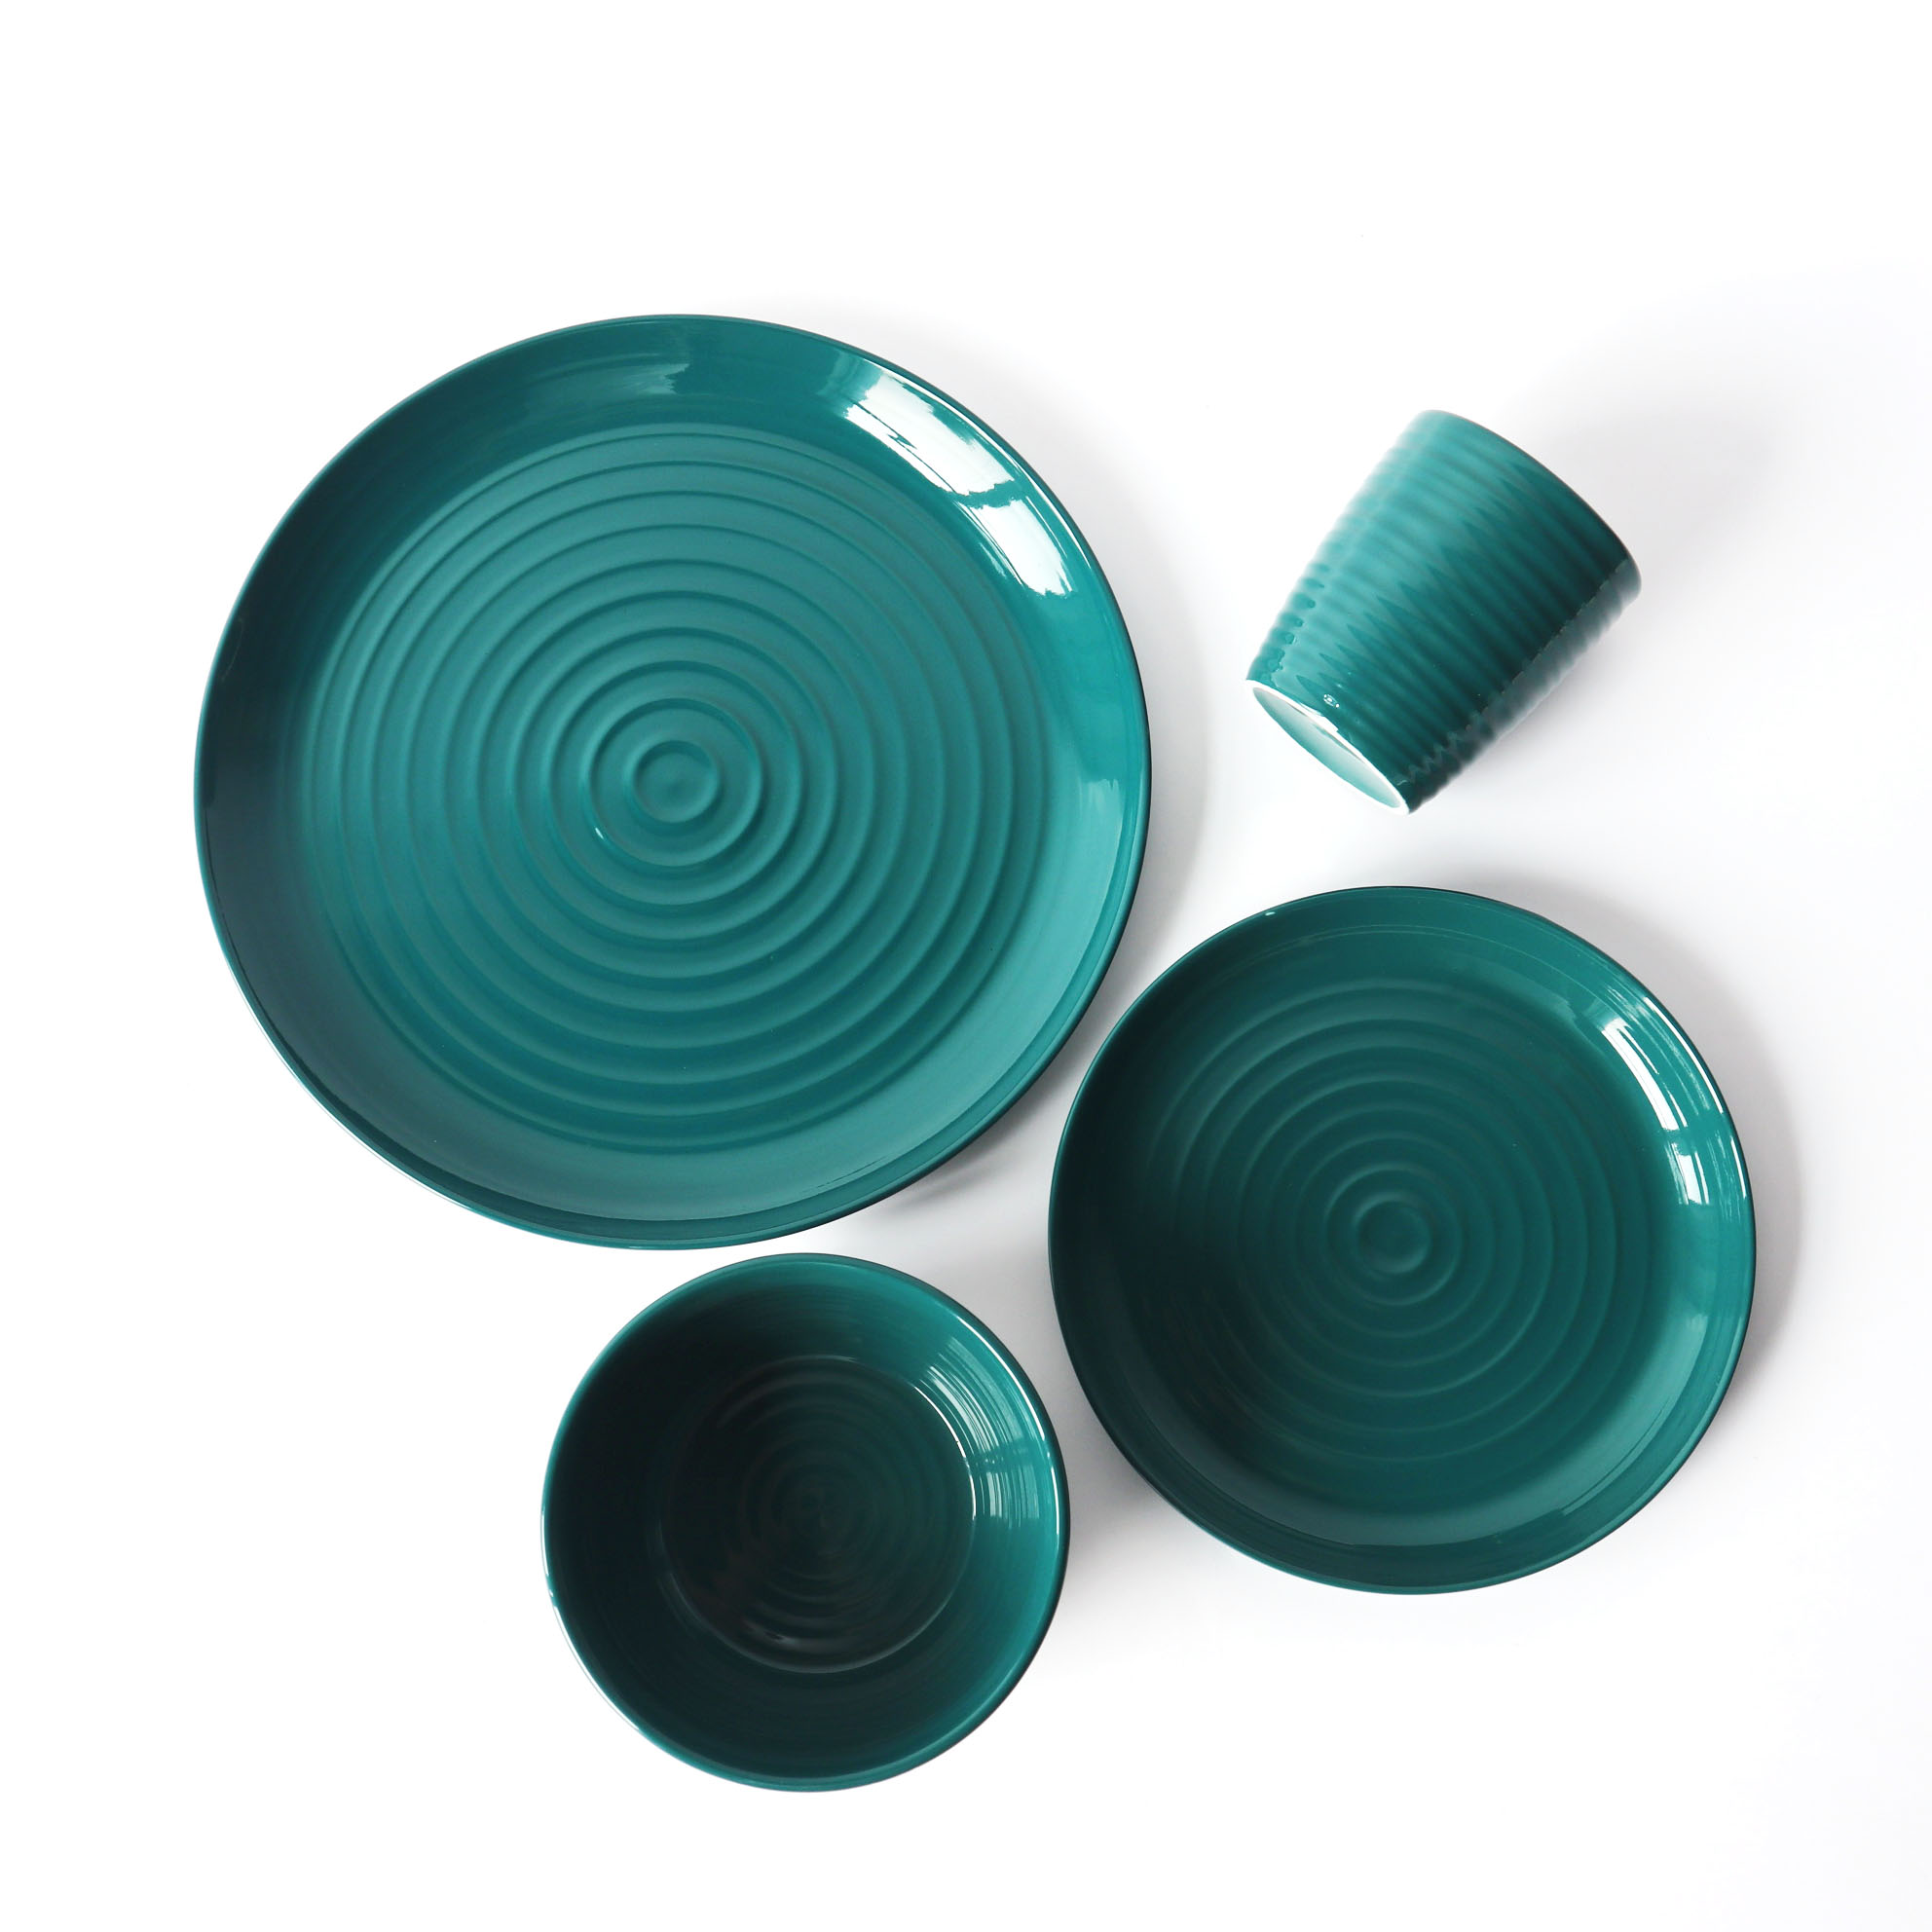 Factors to consider when choosing a color-changing ceramic bowl